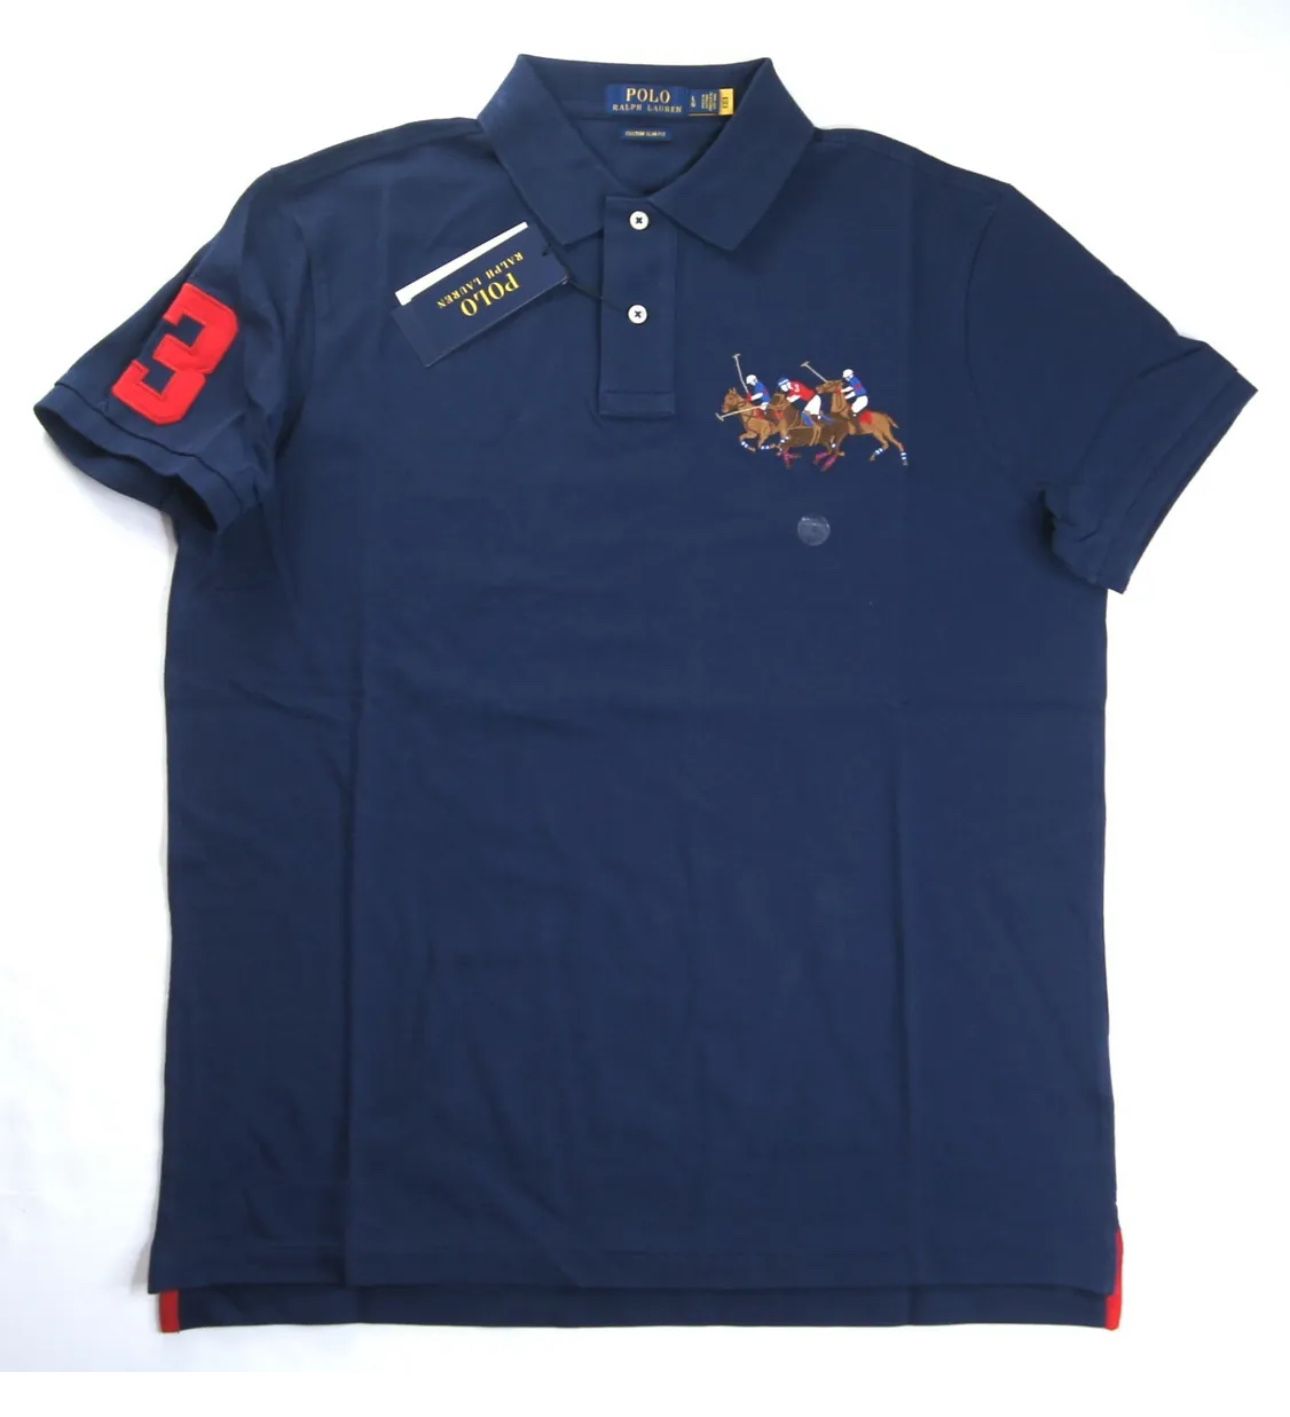 Polo Ralph Lauren Triple Pony Players Horse Racing Embroidered Navy Polo Mesh Shirt, Size 4XB 